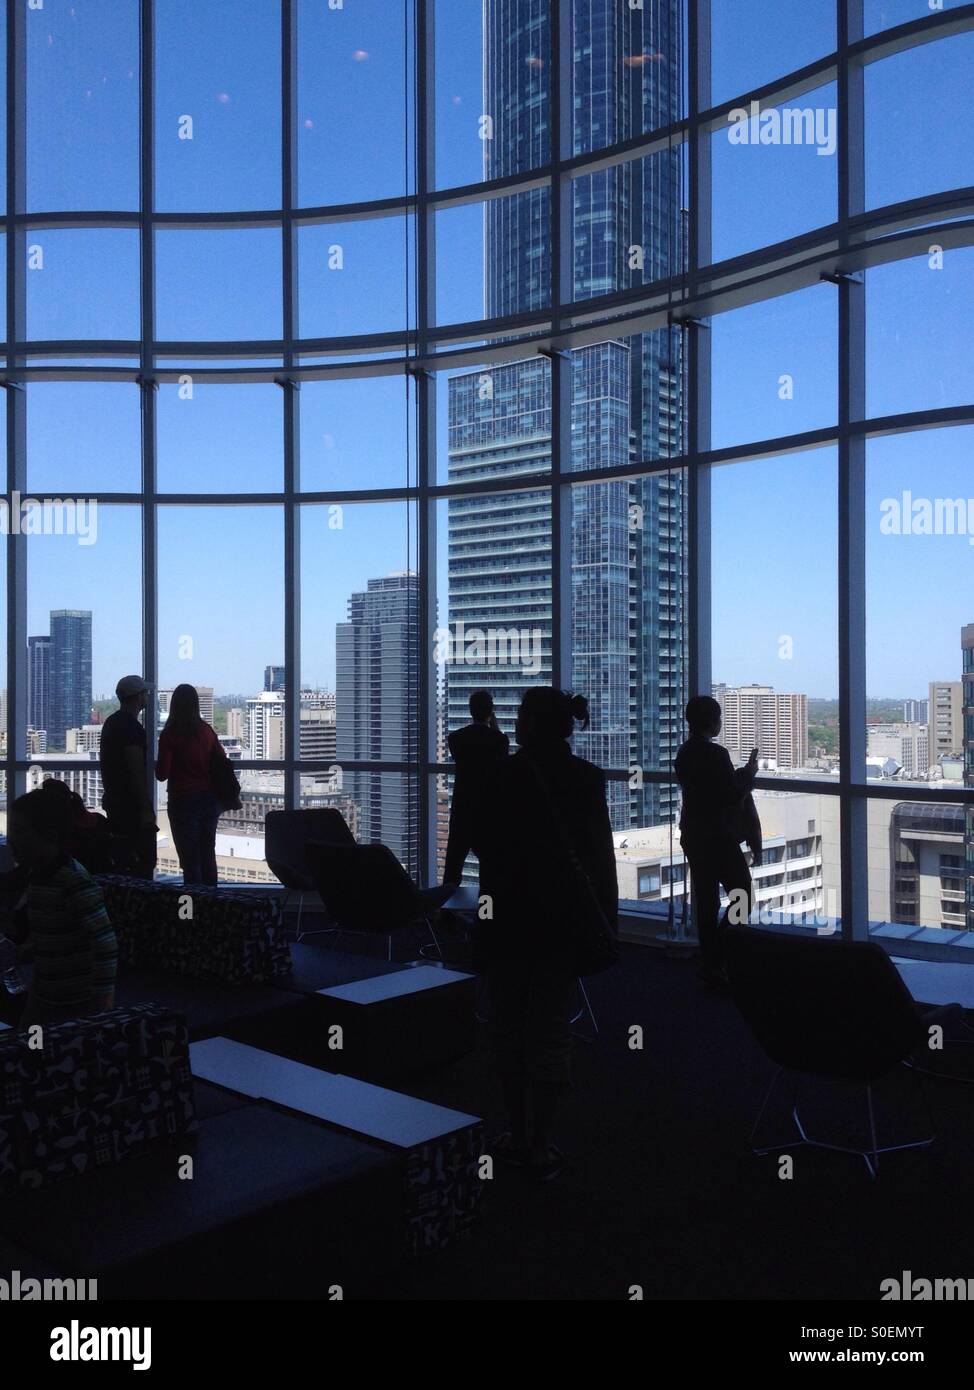 Silhouettes of people viewing a skyscraper through atrium glass panel Stock Photo